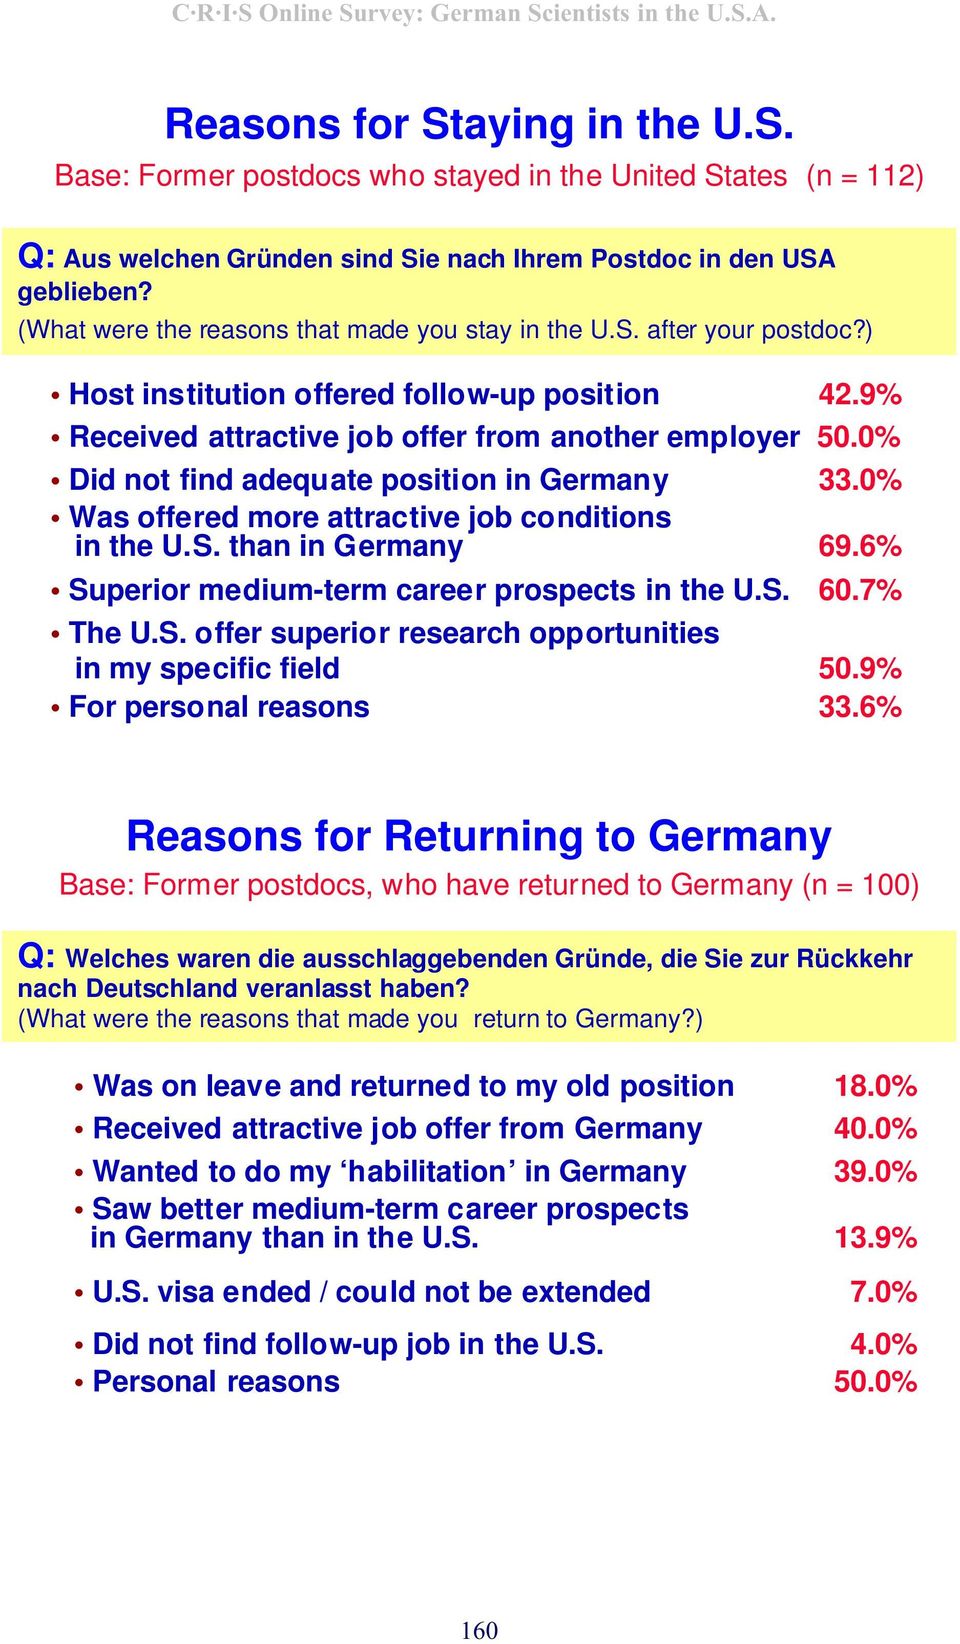 0% Did not find adequate position in Germany 33.0% Was offered more attractive job conditions in the U.S. than in Germany 69.6% Superior medium-term career prospects in the U.S. 60.7% The U.S. offer superior research opportunities in my specific field 50.